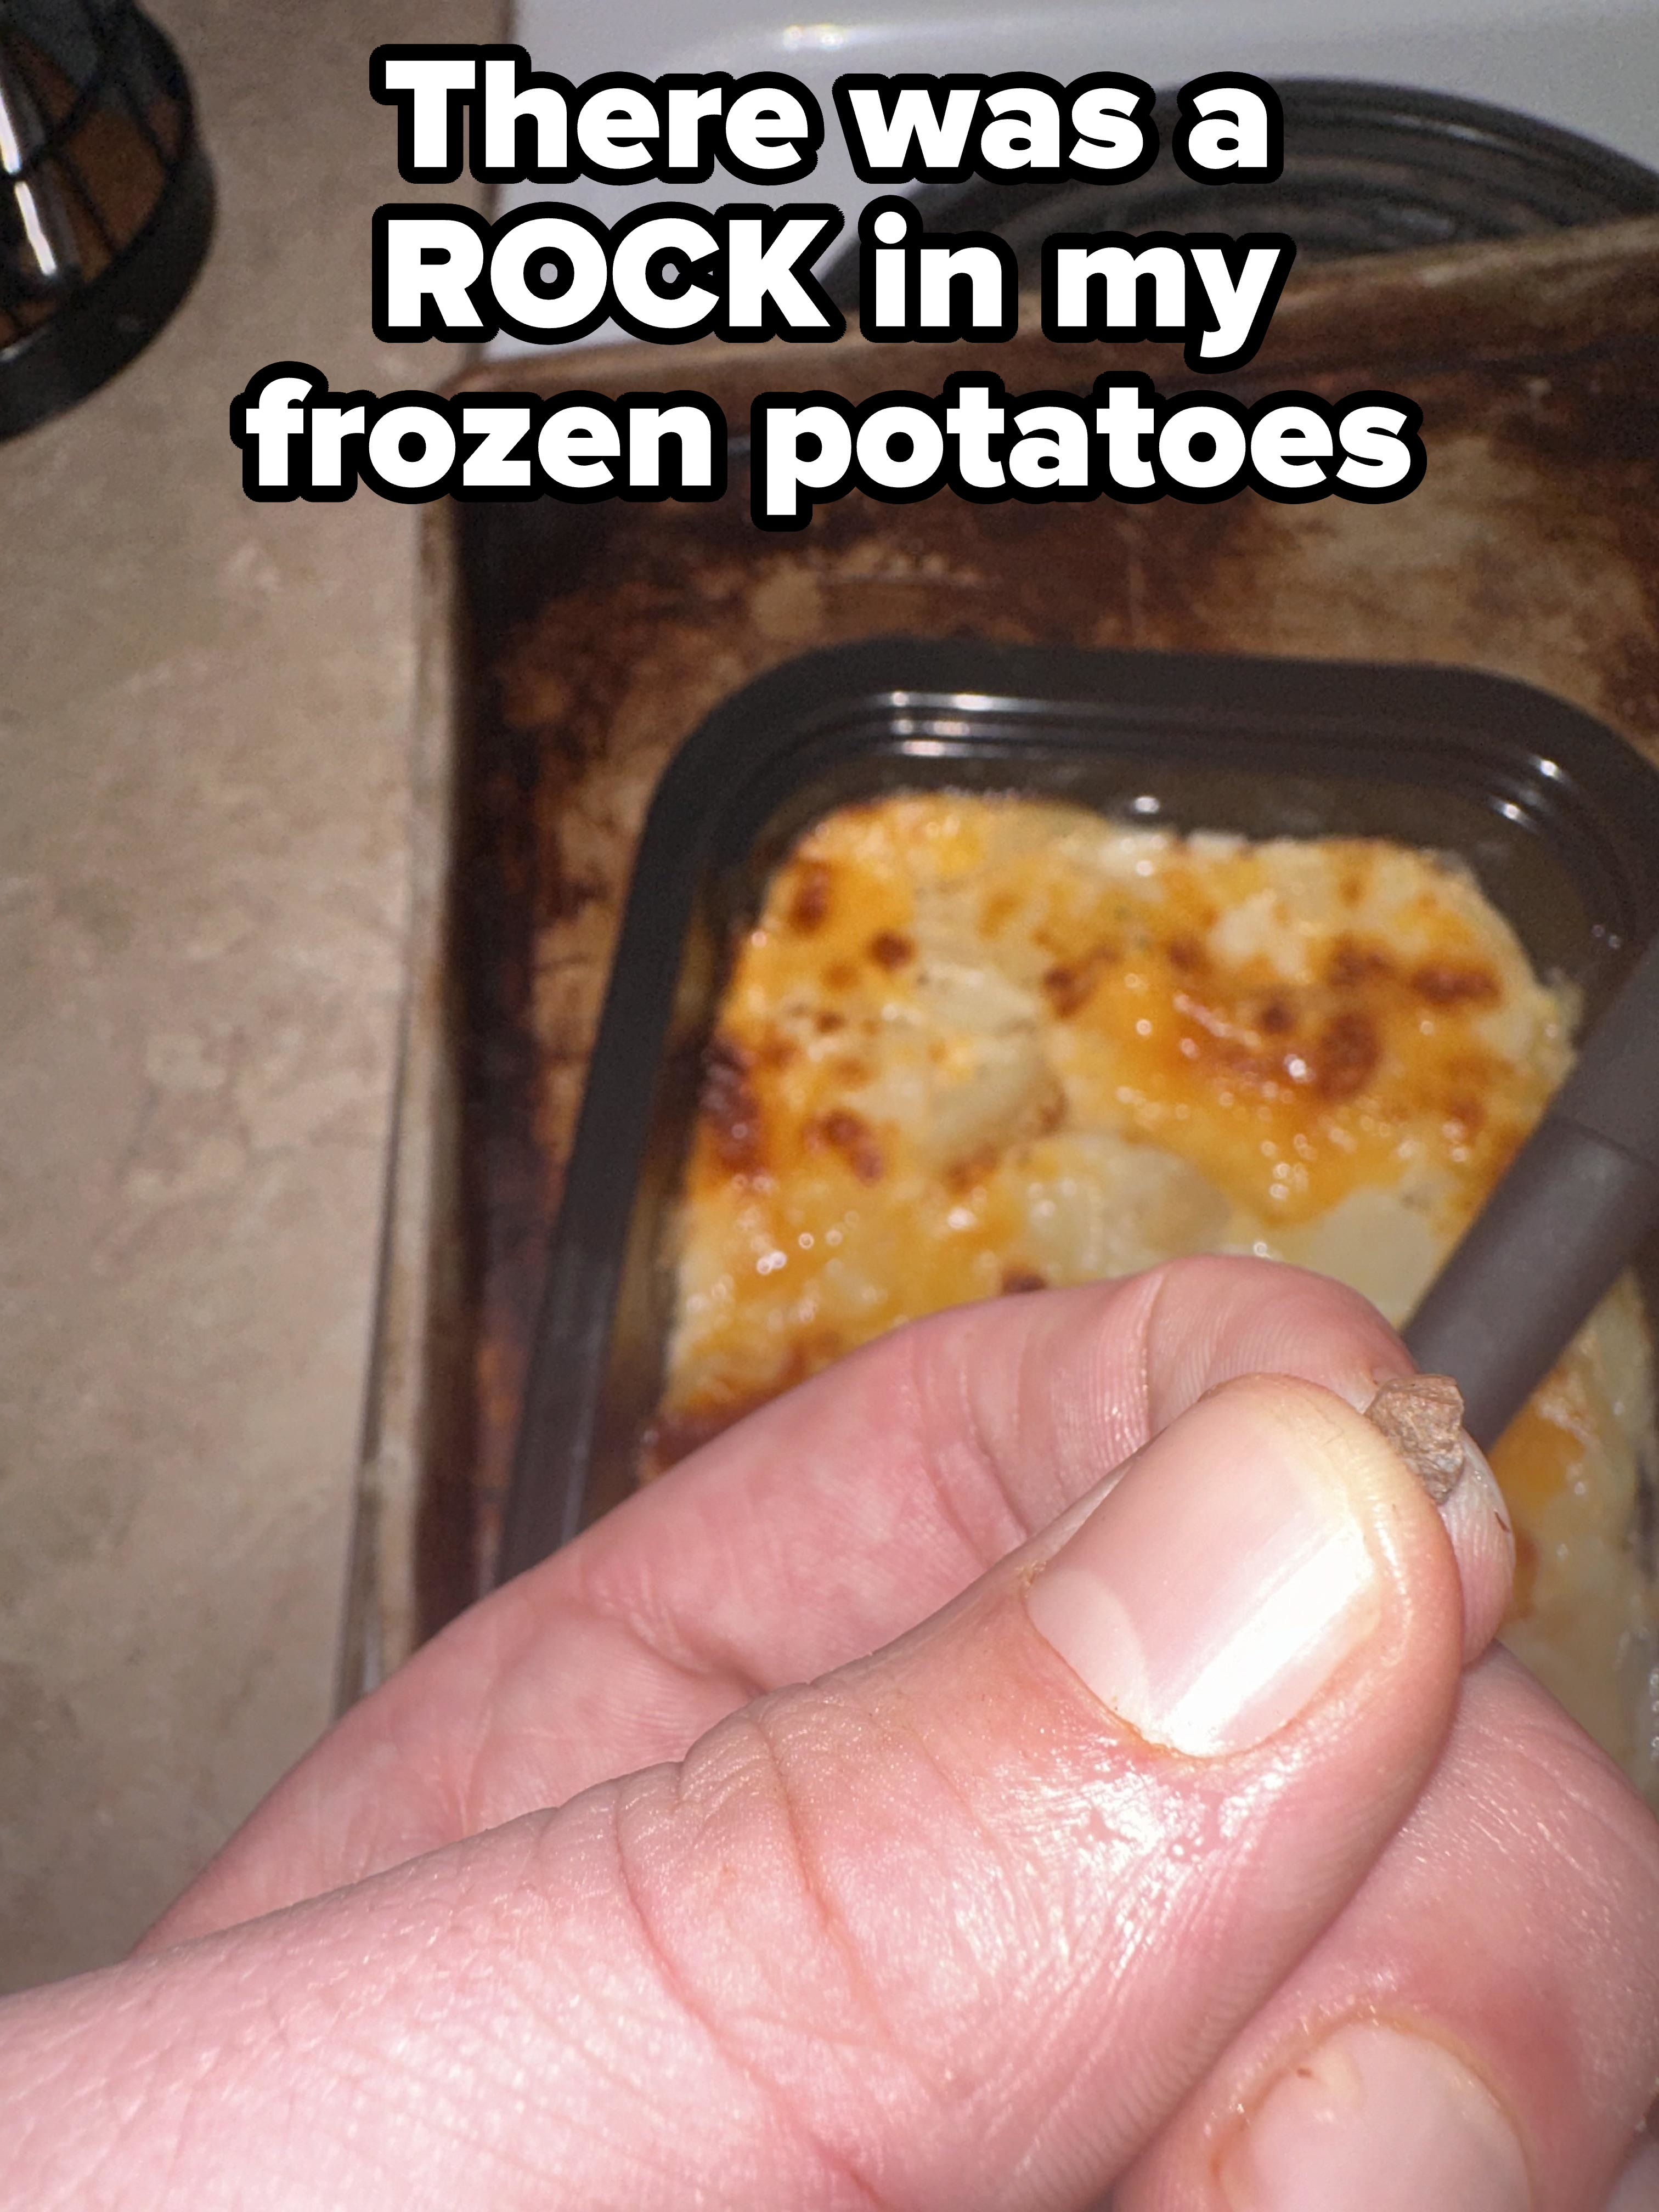 &quot;There was a rock in my frozen potatoes&quot;